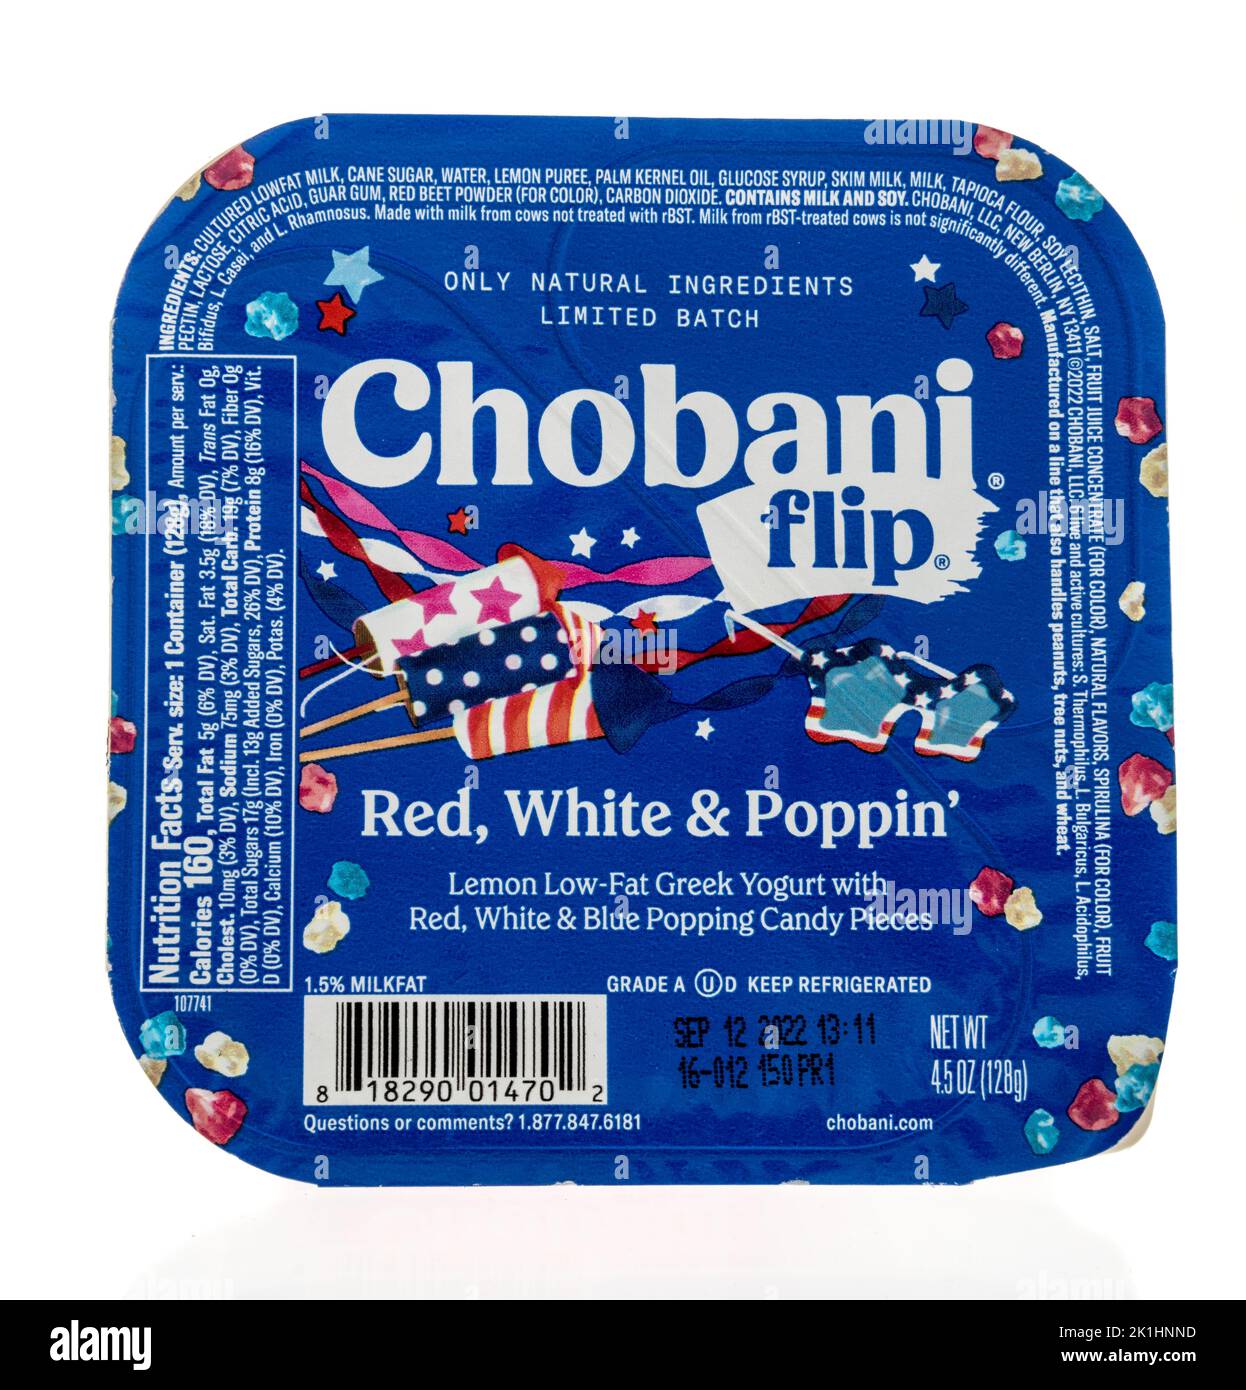 Winneconne, WI - 18 September 2022: A package of Chobani flip red white popping greek yogurt on an isolated background. Stock Photo